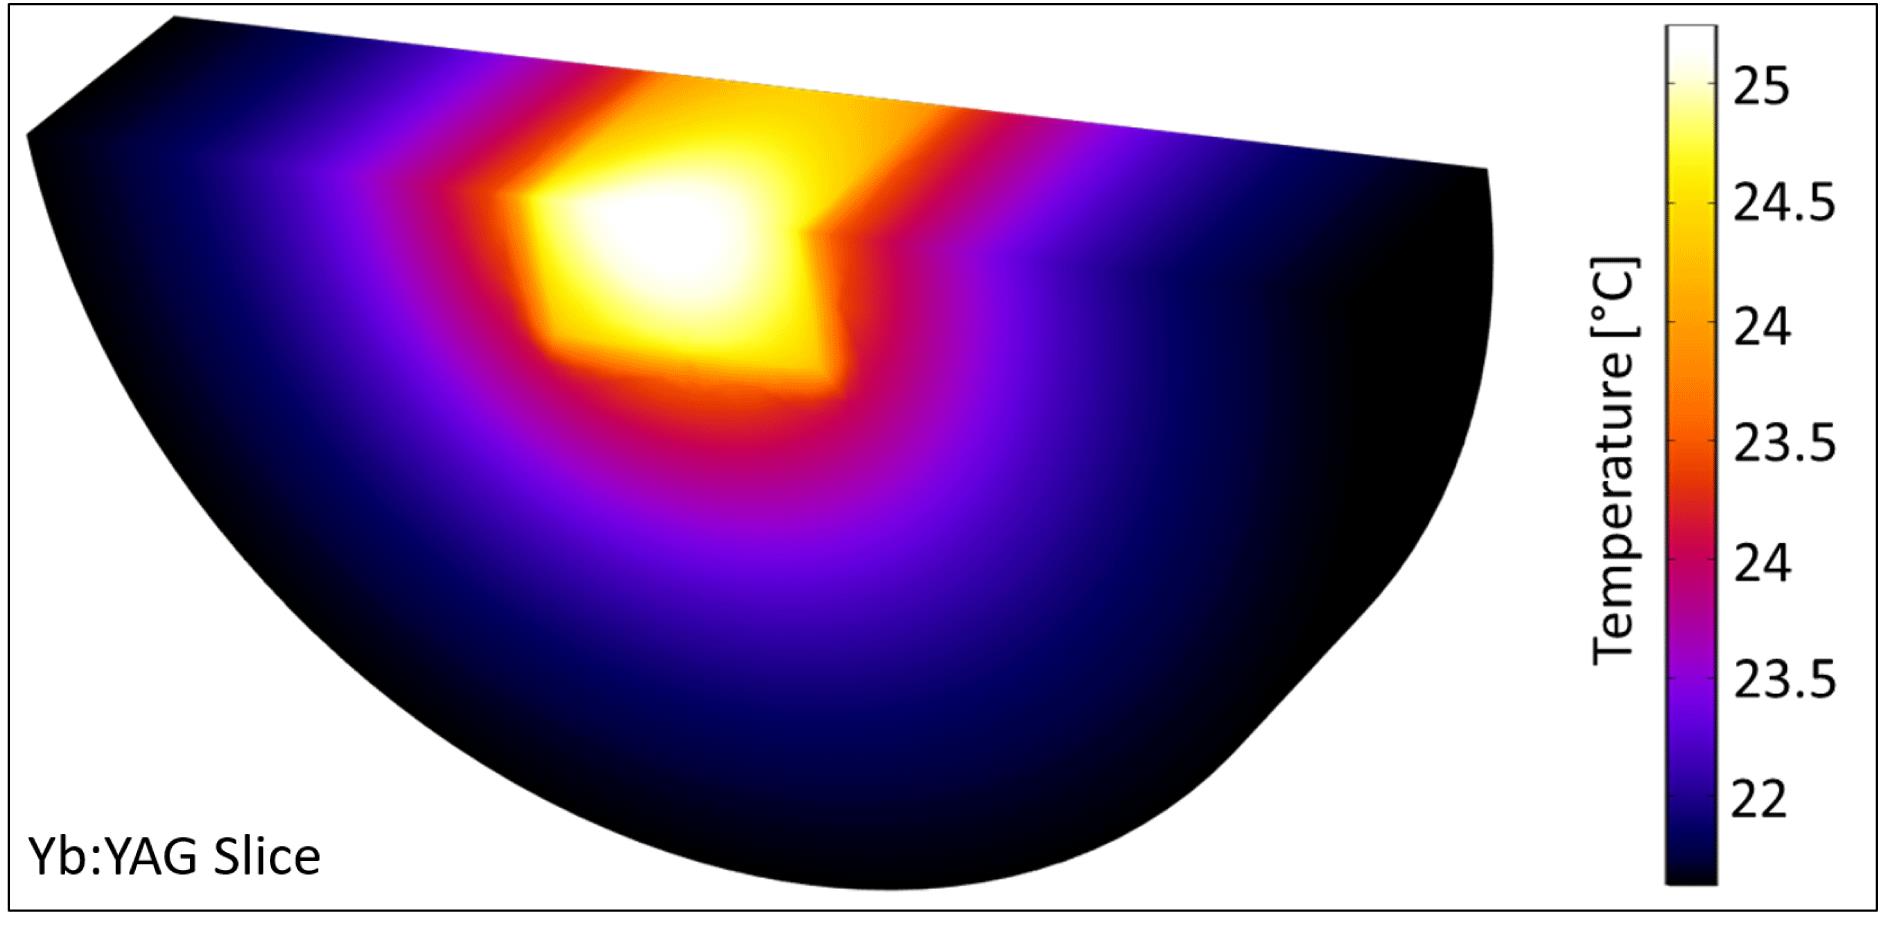 A slice through the pumped Yb:YAG model in COMSOL.